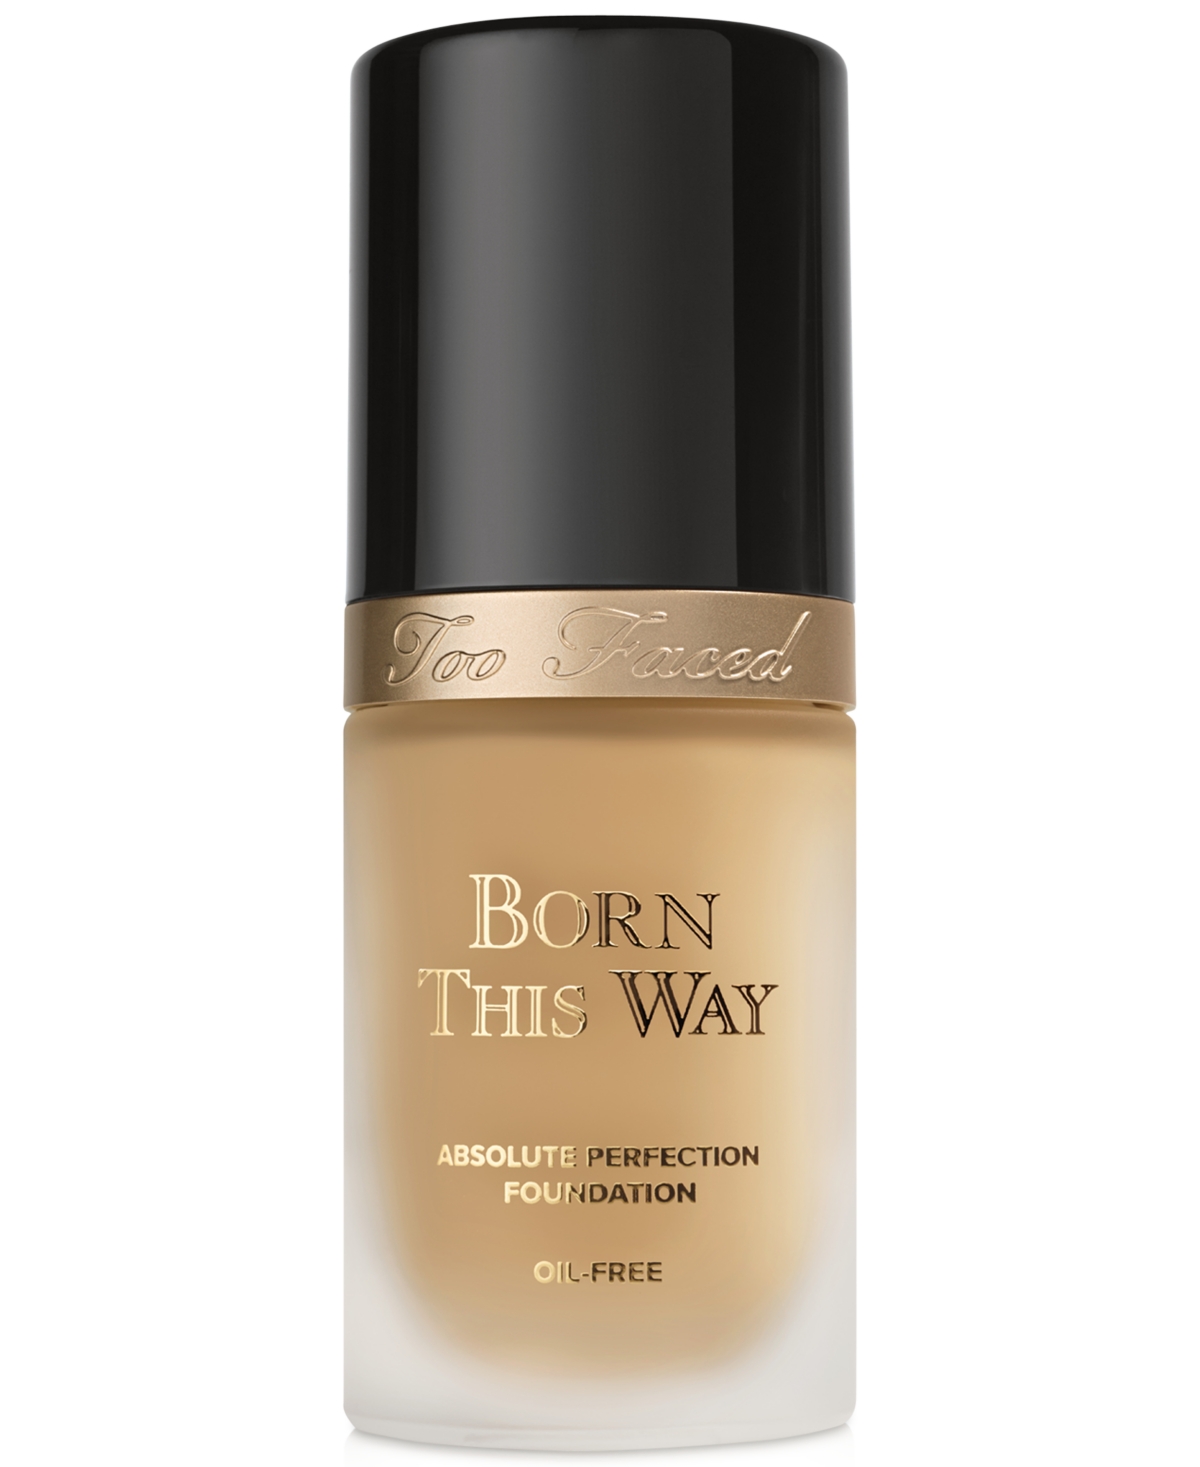 Too Faced Born This Way Flawless Coverage Natural Finish Foundation In Natural Beige - Light Medium W,neutral U